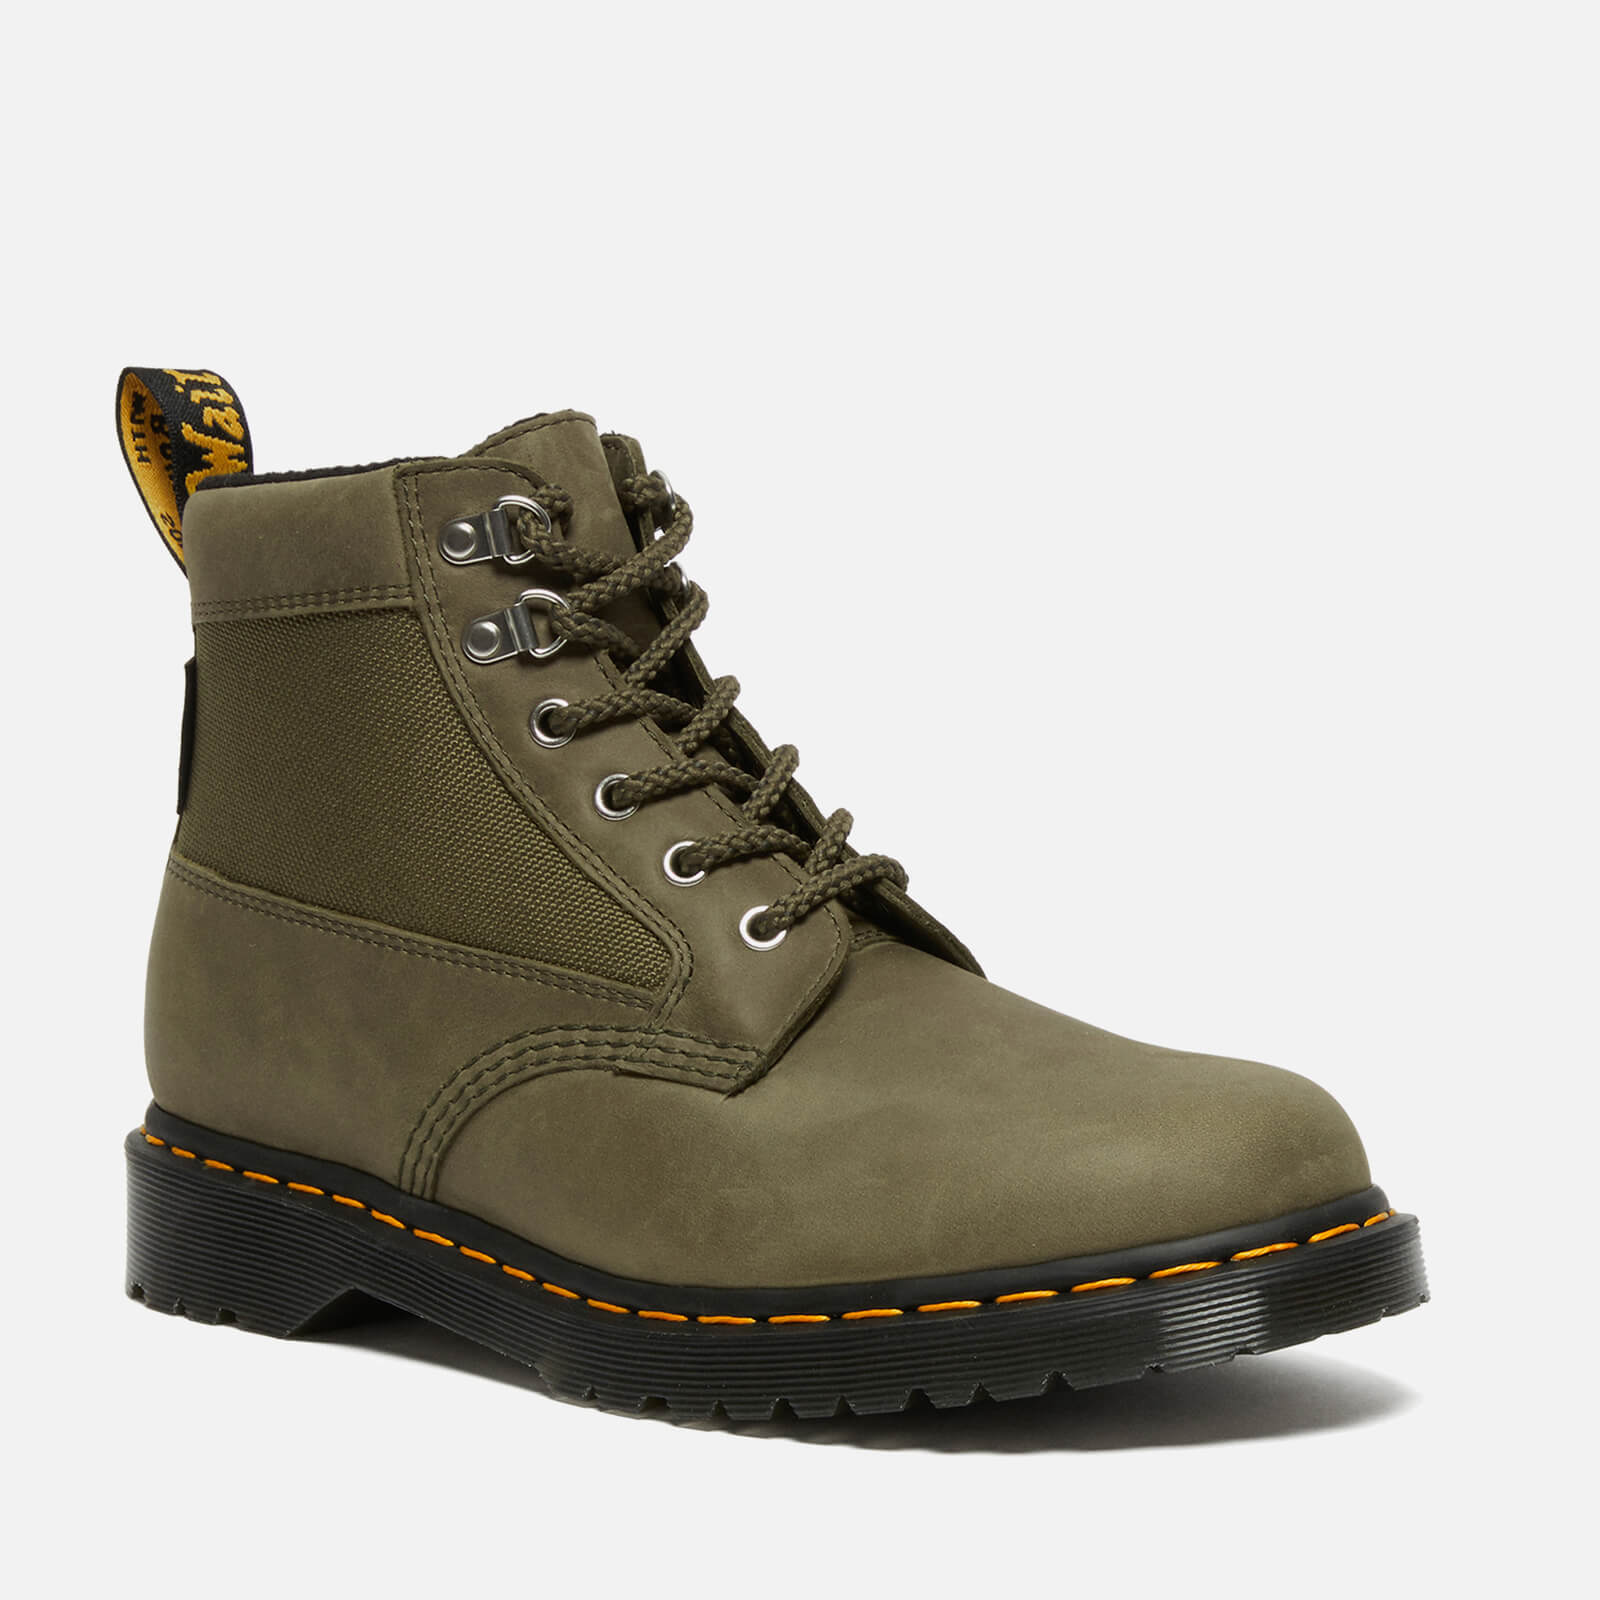 Dr. Martens 101 Streeter Leather and Mesh Boots - UK 9